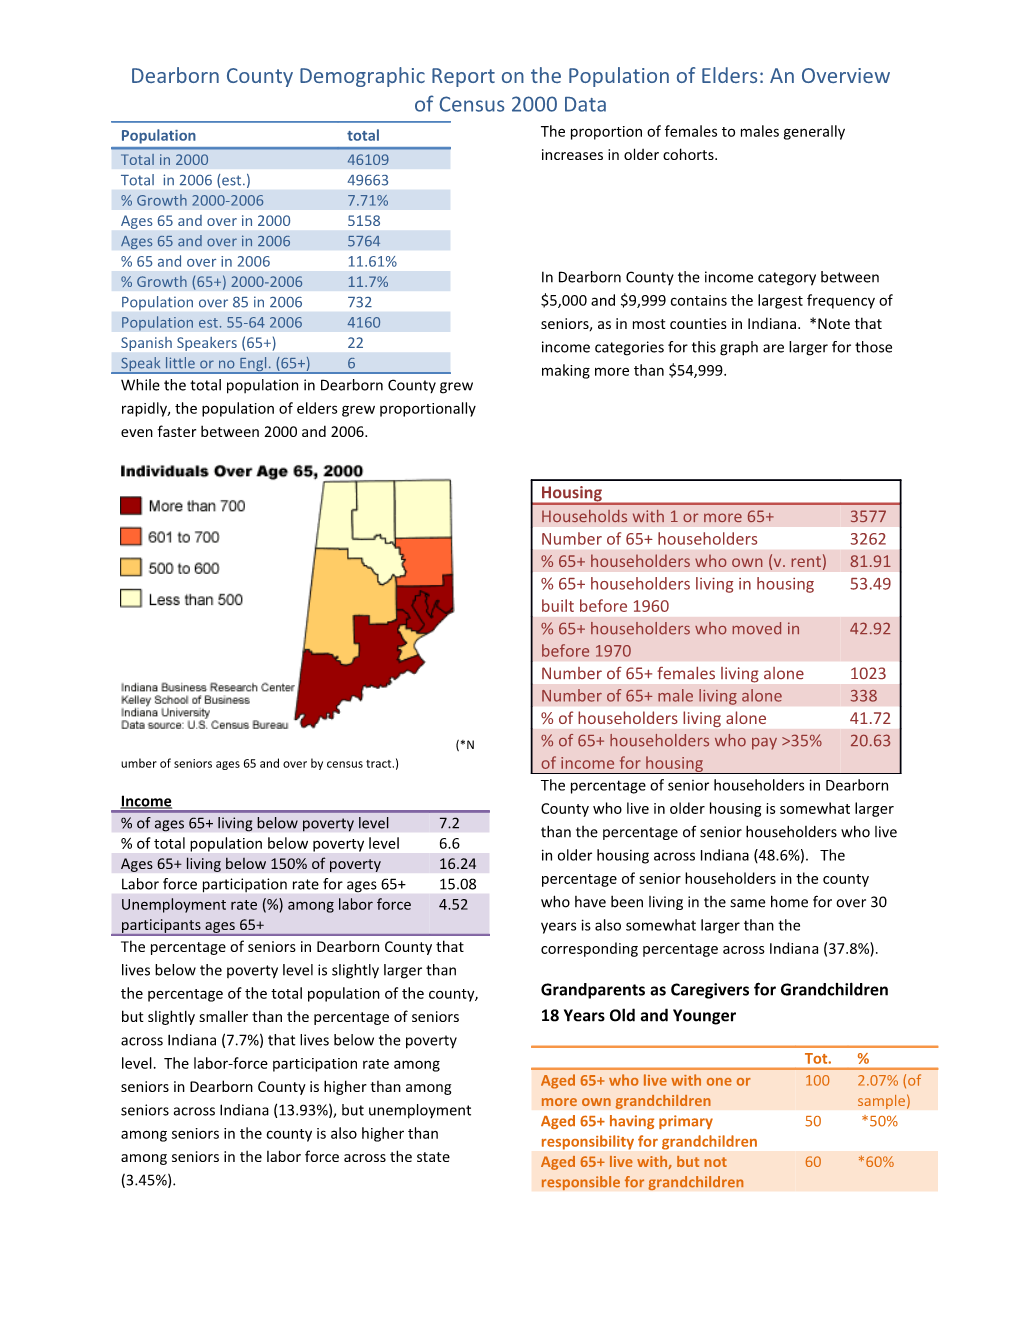 Dearborn County Demographic Report on the Population of Elders: an Overview of Census 2000 Data